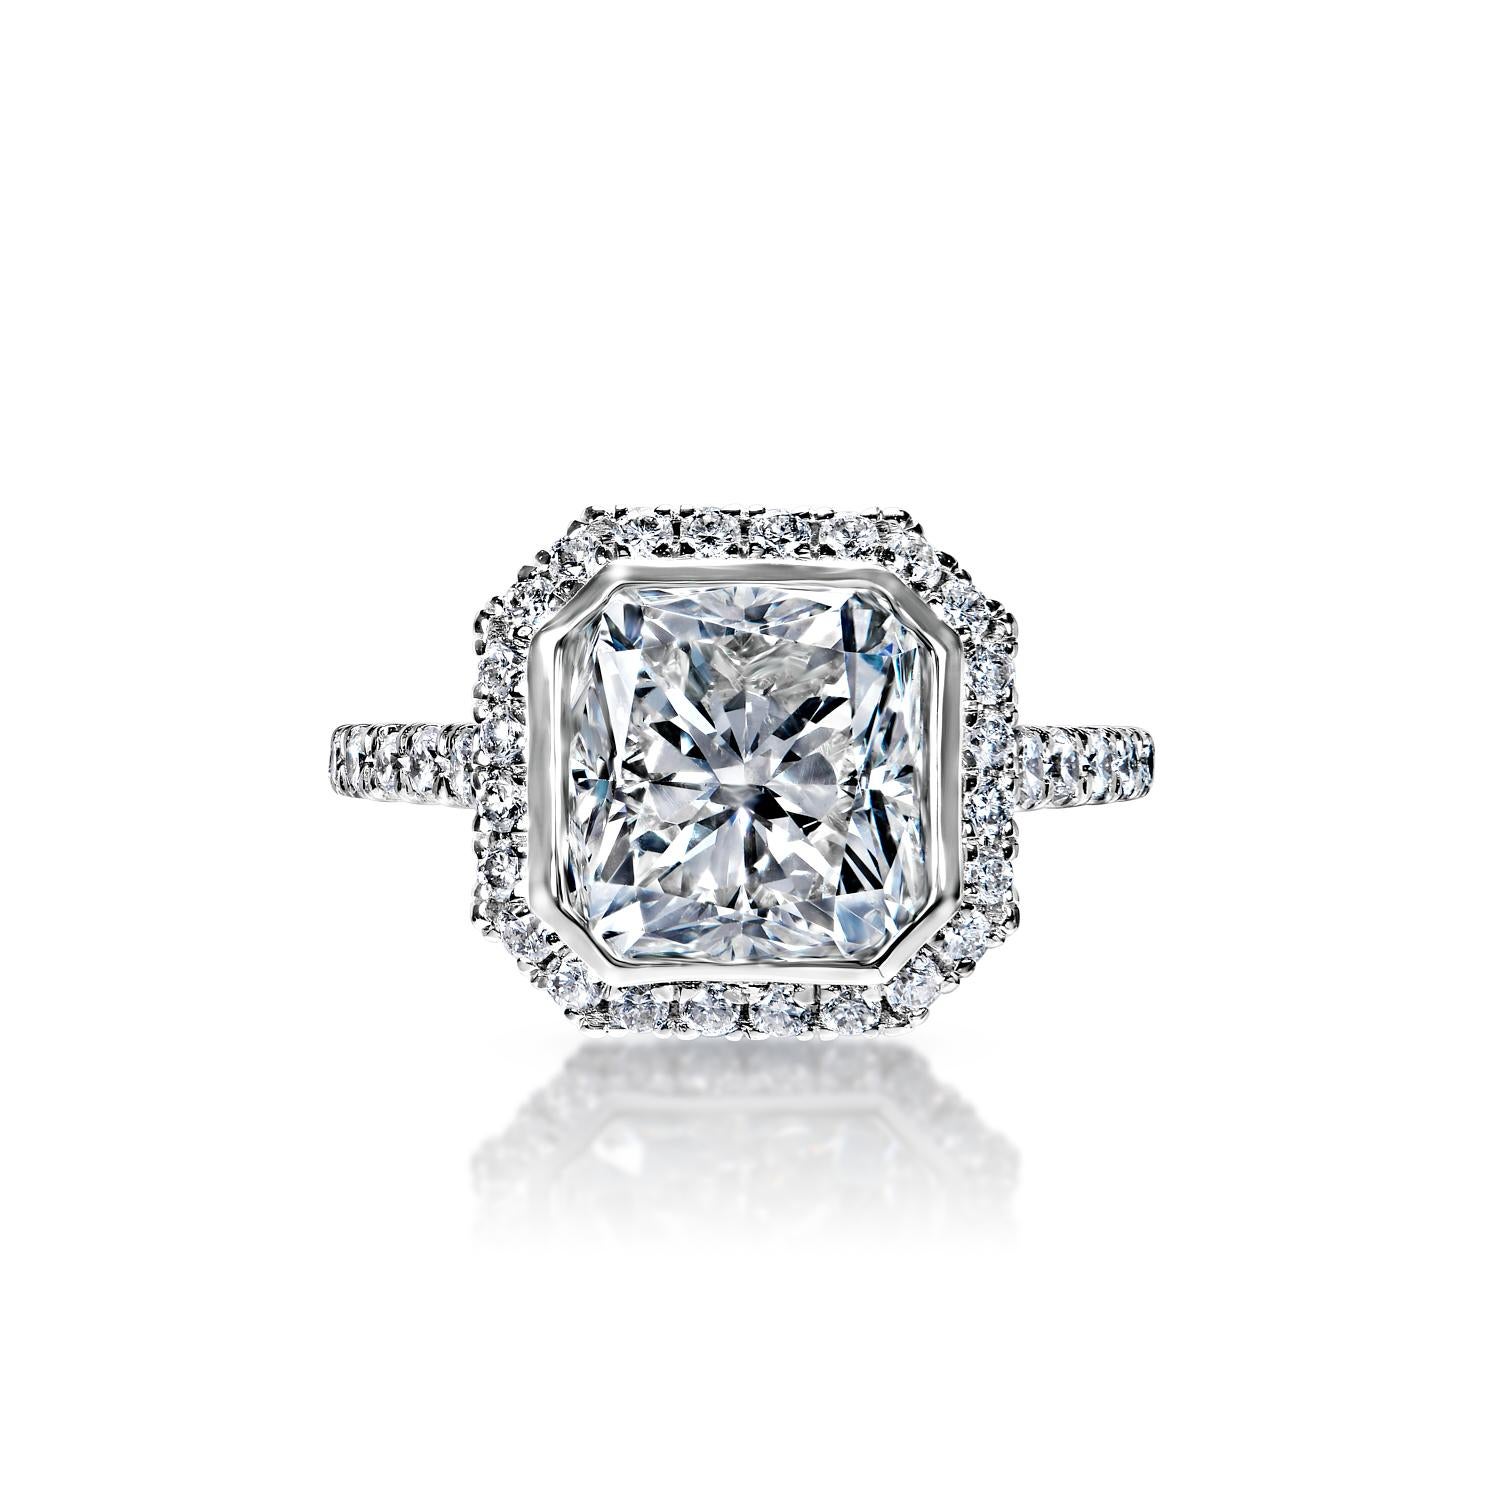 
Center Diamond:

Carat Weight: 4.07 Carats
Color : G
Clarity: VS2
Style: Cushion Cut
Feather Filled- Spl Care Req'd

Ring:
Settings: Halo, Bezel, Sidestone
Metal: 18k White Gold
Style: Round Brilliant Cut
Diamonds: 0.91 Carats
Size: Can be adjusted